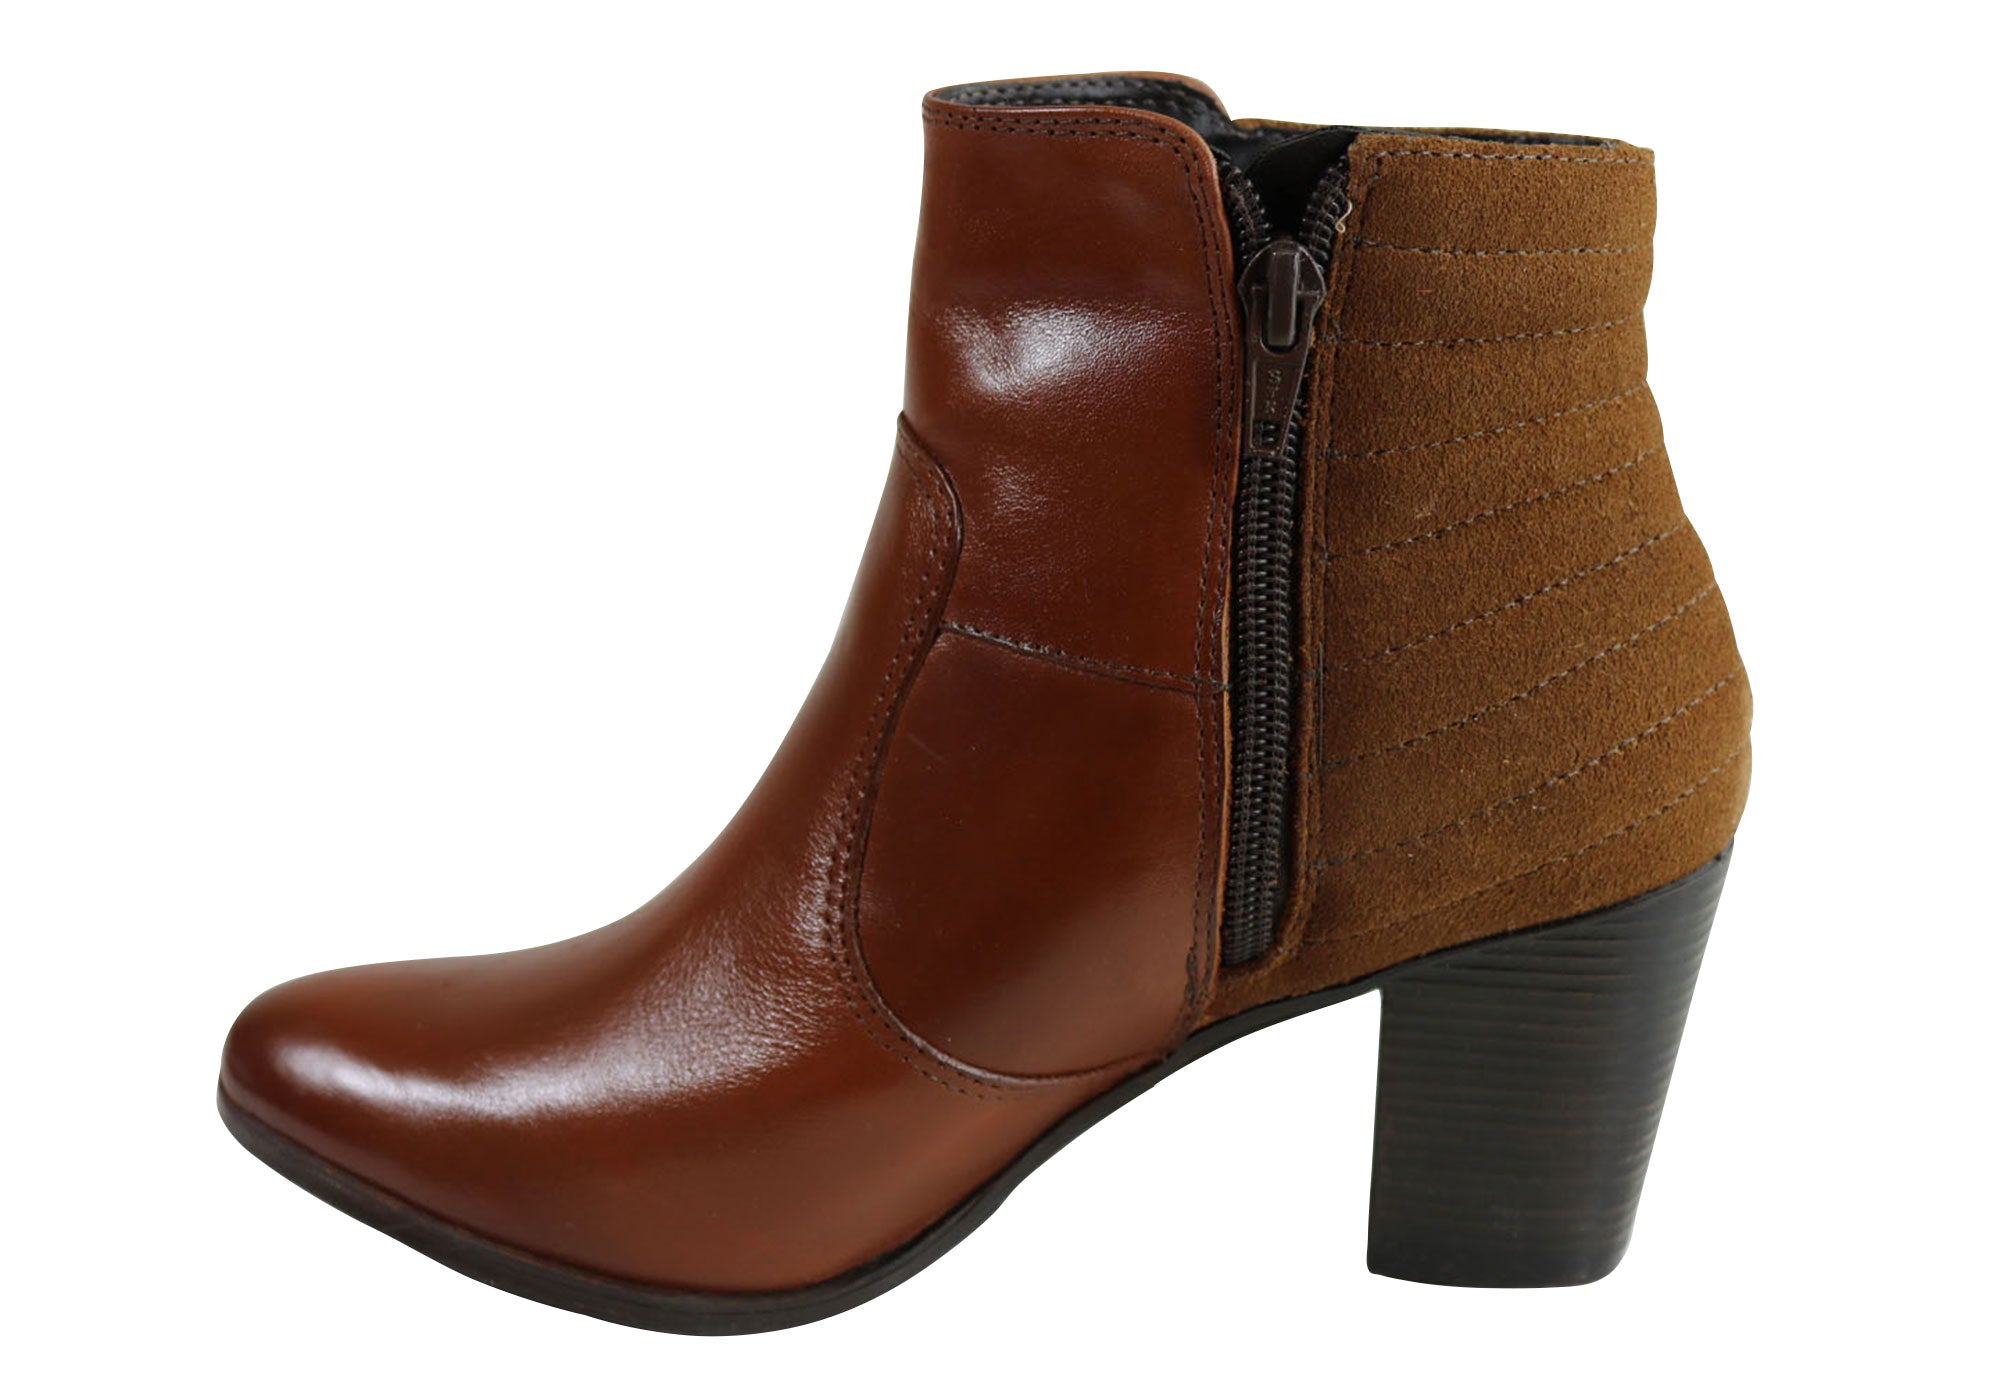 Dazzani Amber Womens Comfort Leather Heel Ankle Boots Made In Brazil ...